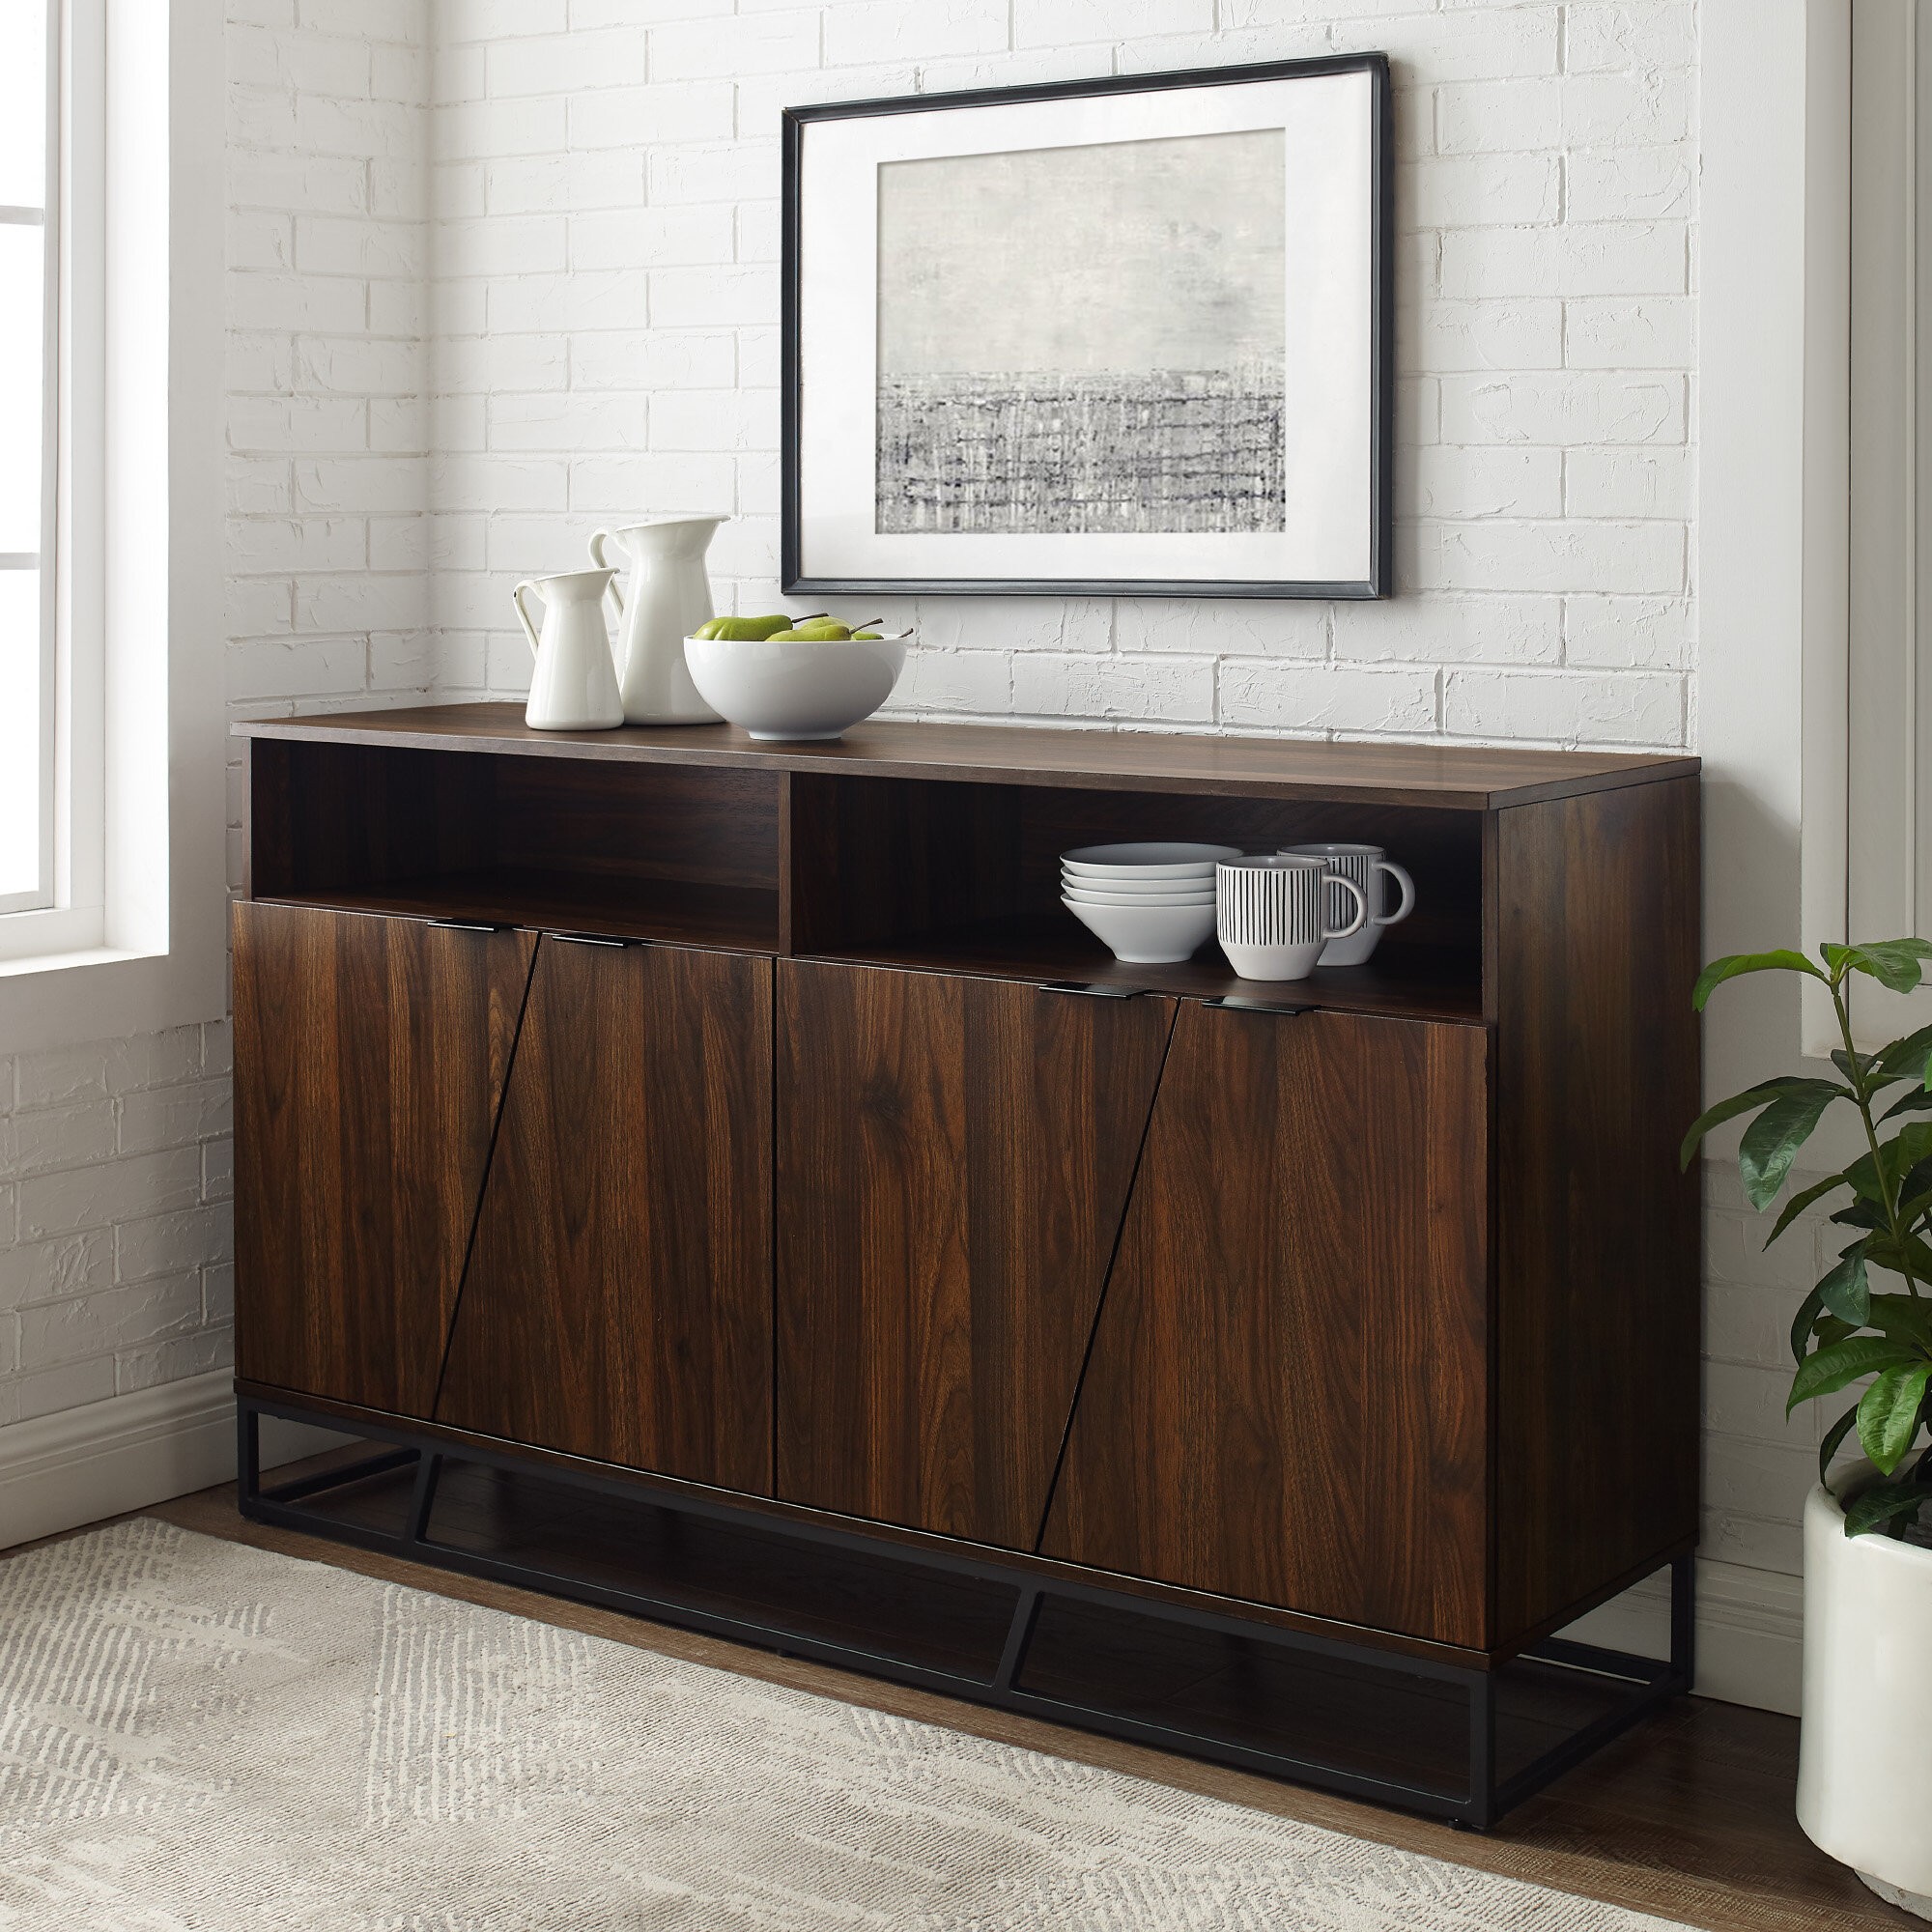 Fritch Angled Door Sideboard